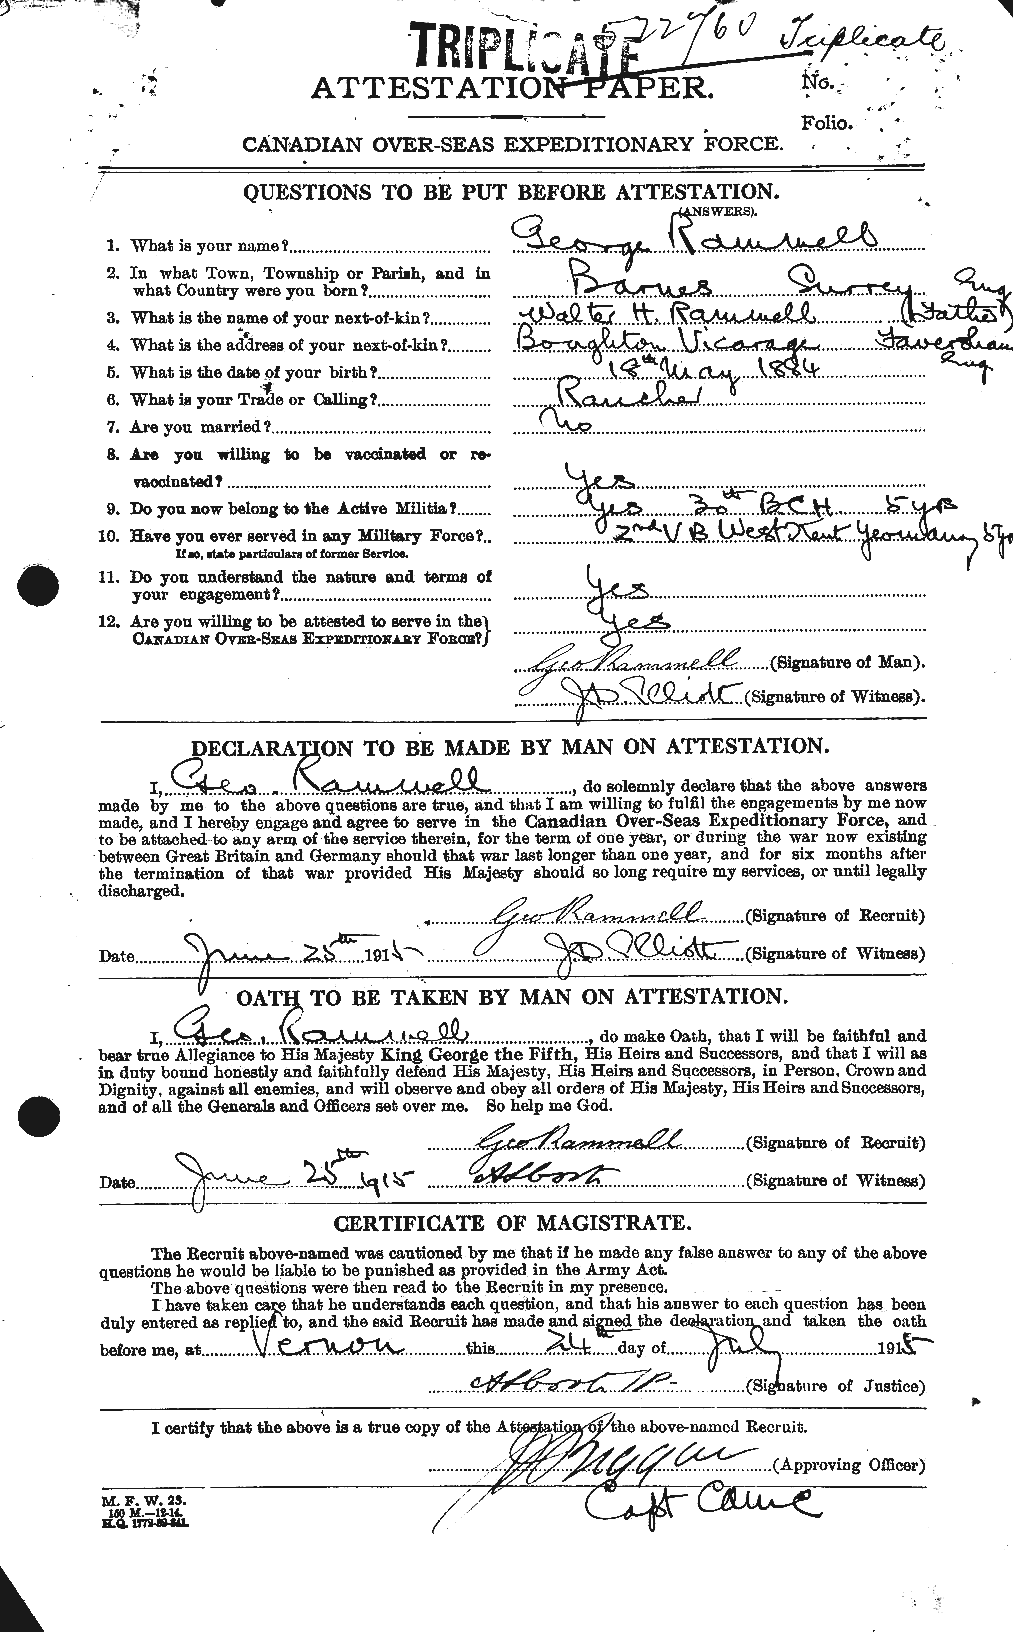 Personnel Records of the First World War - CEF 592391a